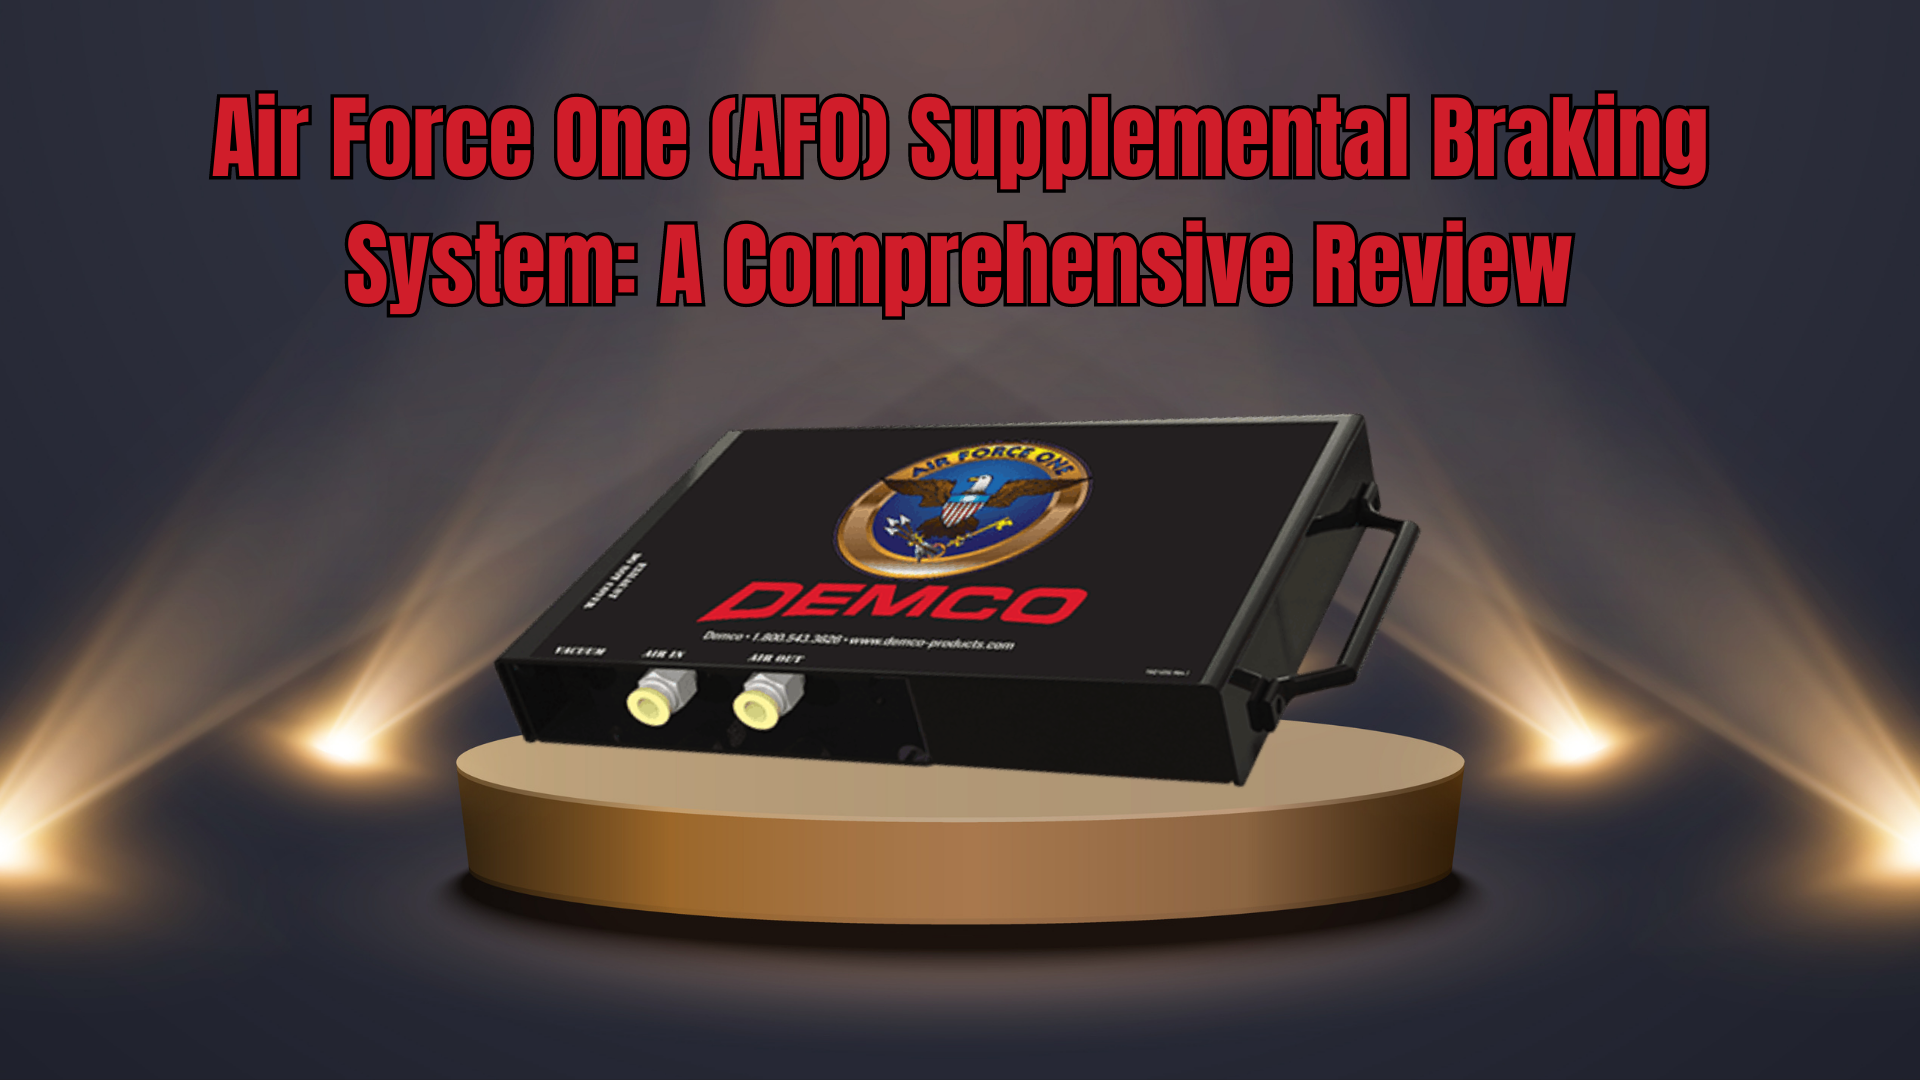 Air Force One (AFO) Supplemental Braking System: A Comprehensive Review